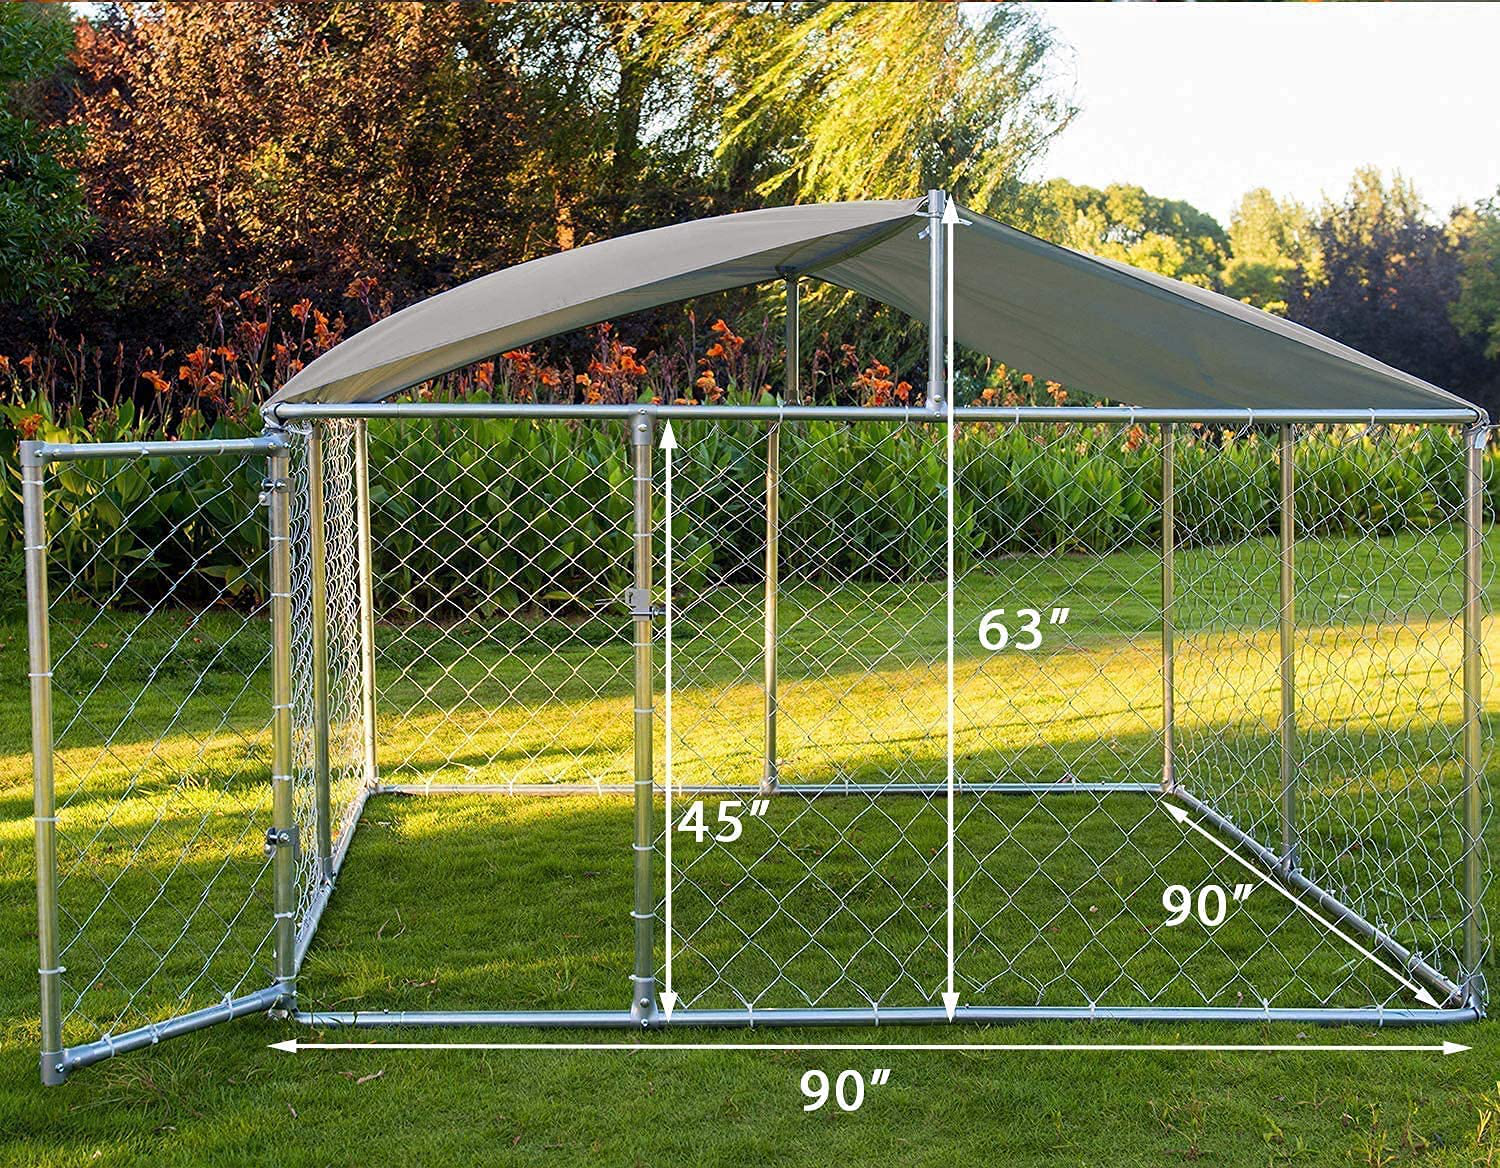 MAGIC UNION outside Dog Kennels Playpen for Dogs Crate with Uv-Resistant Waterproof Cover Outdoor Dog Fence for Backyard Dog Run House